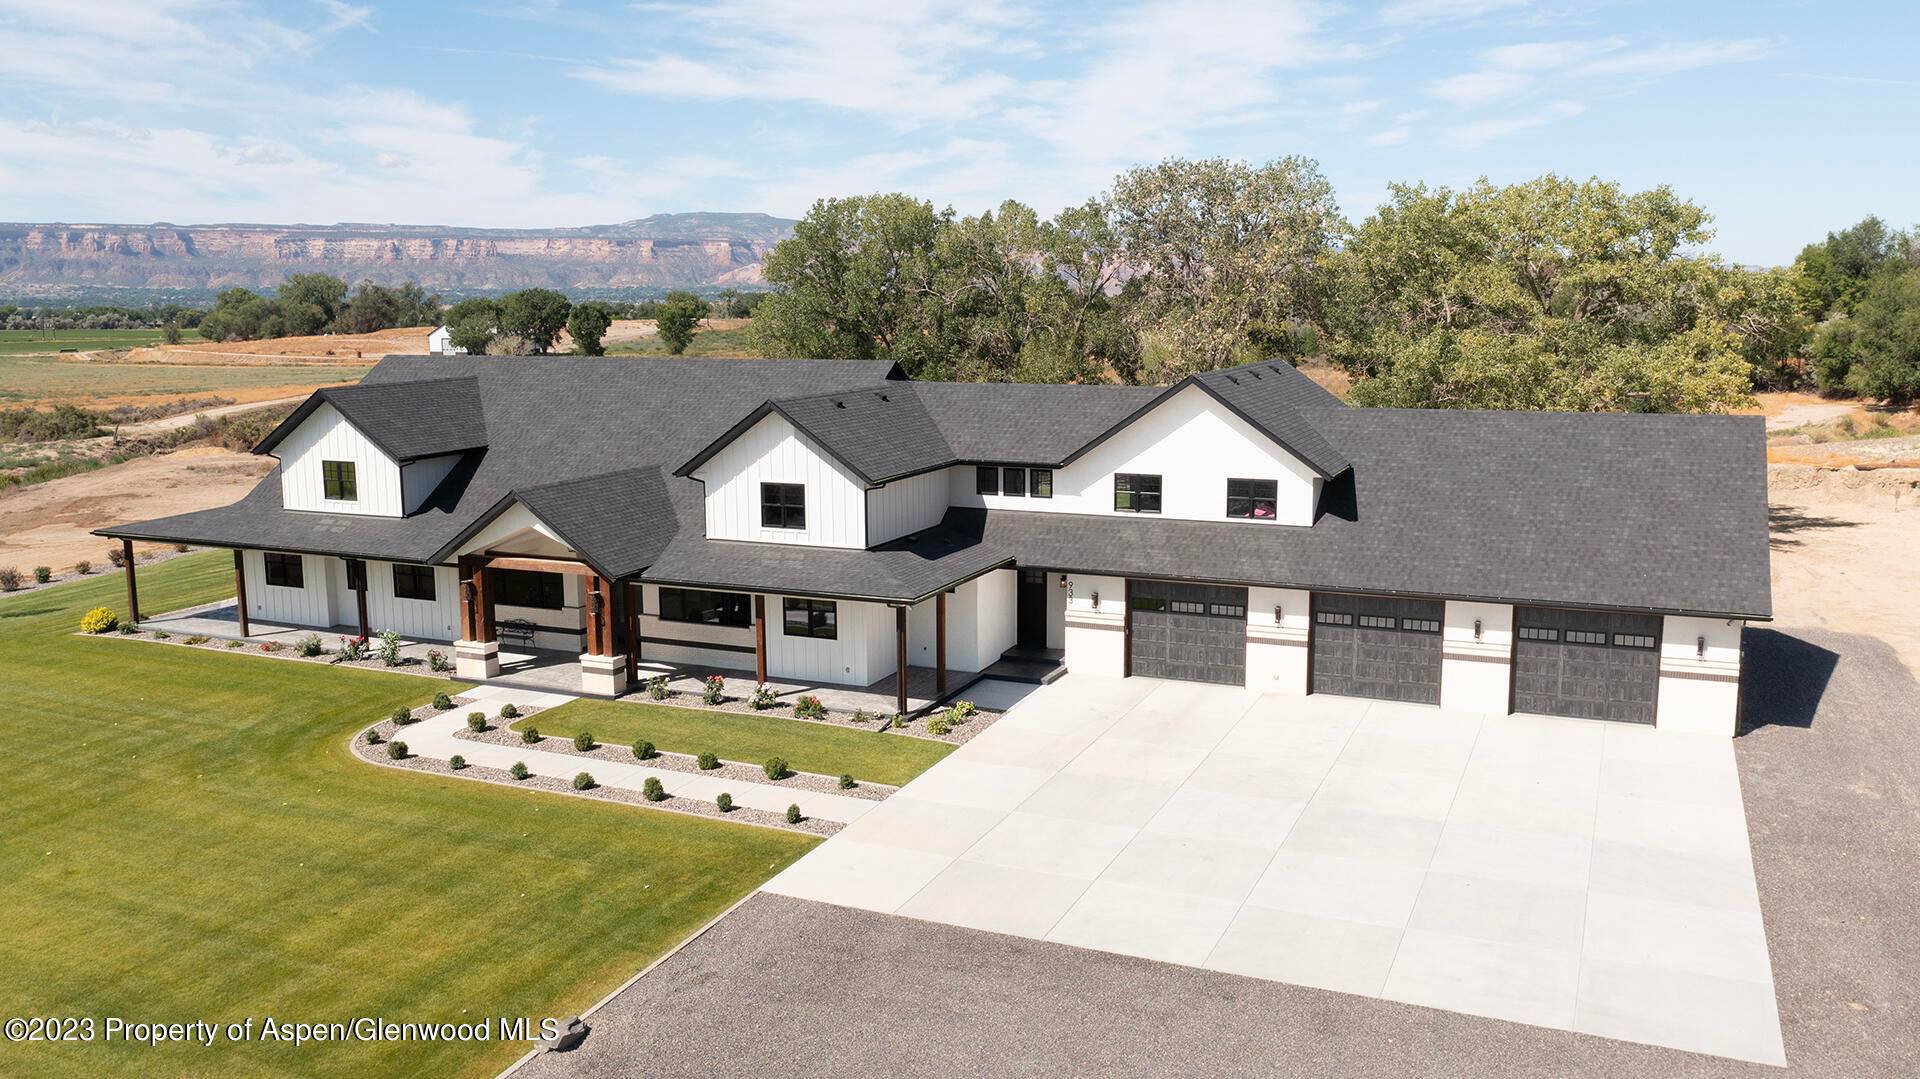 Allow me to introduce to you this magnificent 6, 415 square foot estate with a 2, 400 square foot attached 3 car garage constructed in 2021 that rests comfortably on ...